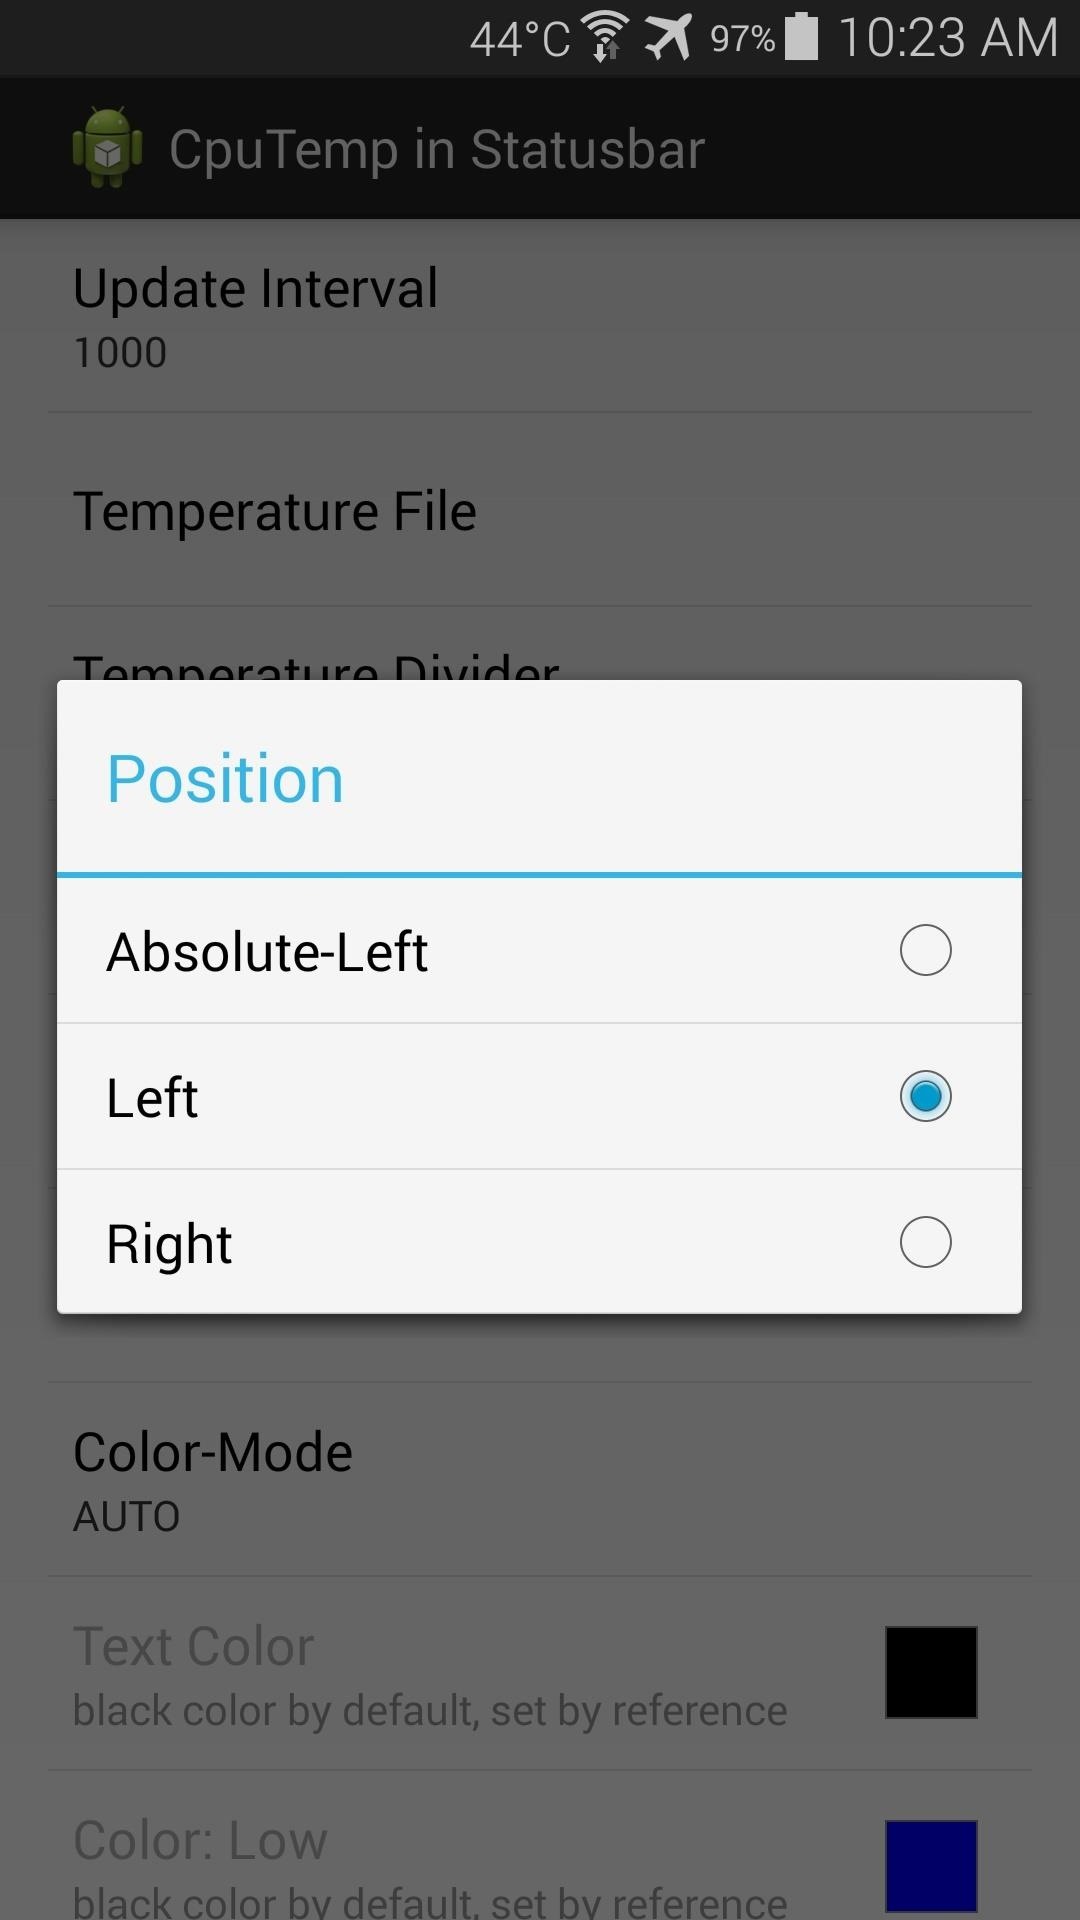 Monitor CPU Temperature from Android's Status Bar